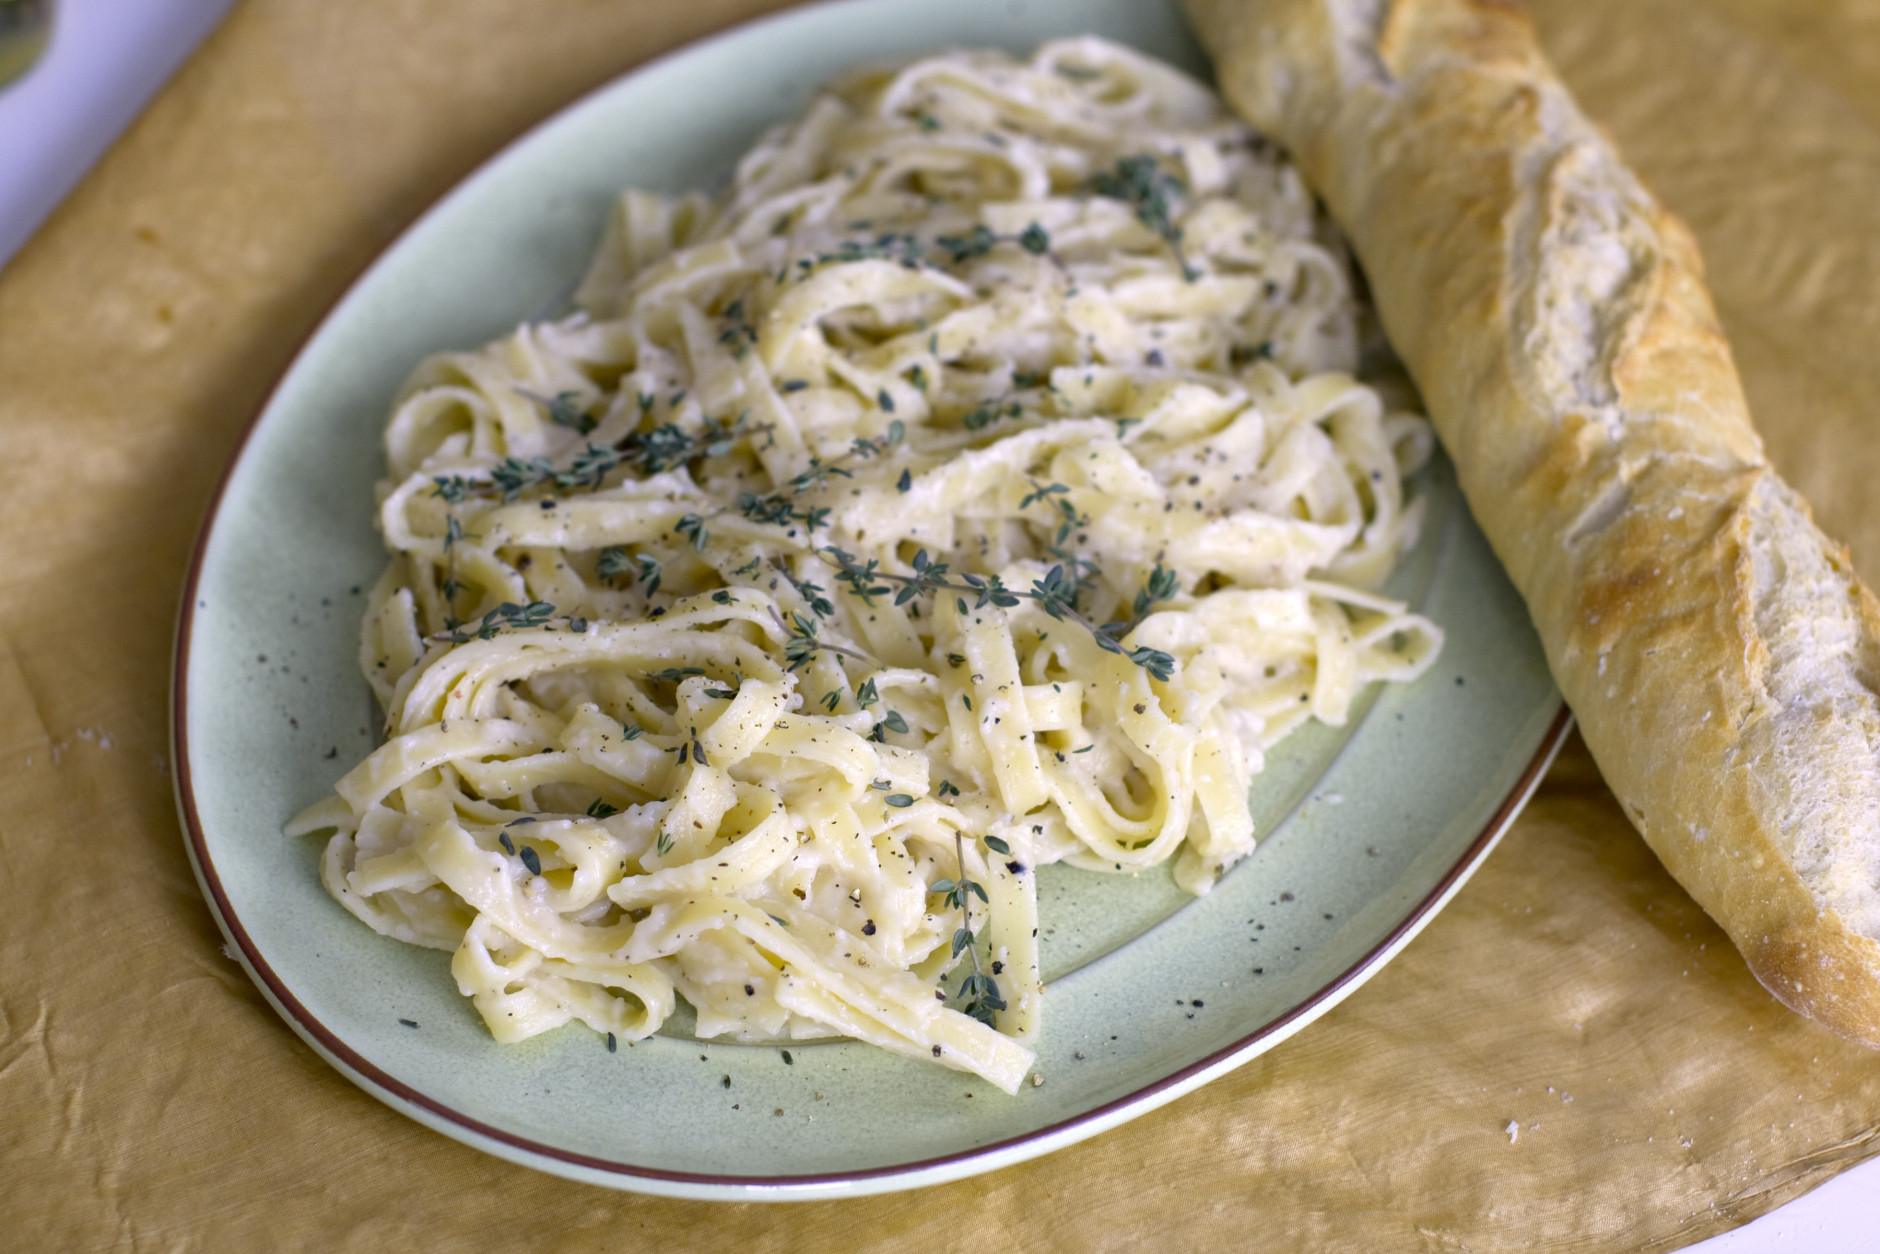 This Jan. 27, 2014 photo show fettuccini with garlic parmesan puree in Concord, N.H. (AP Photo/Matthew Mead)